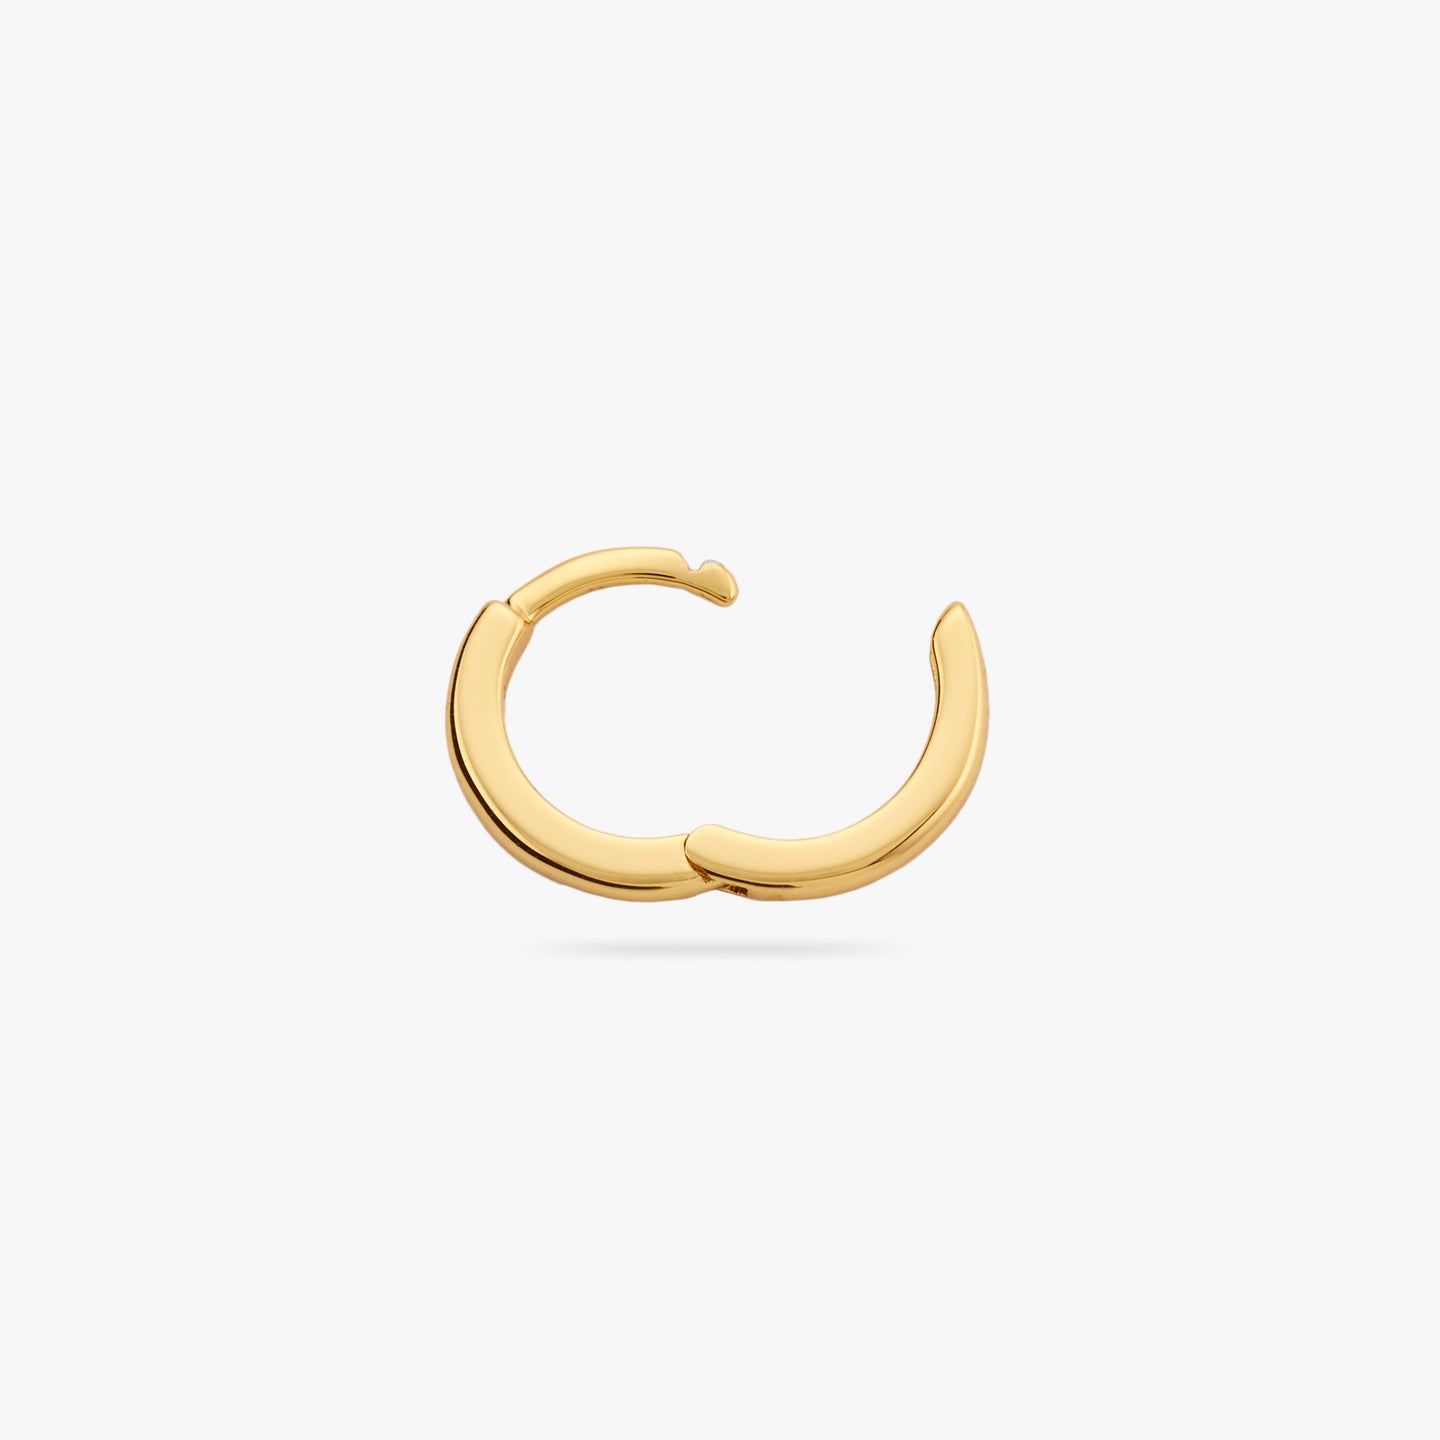 This is a small gold huggie with square edges and its clasp undone color:null|gold